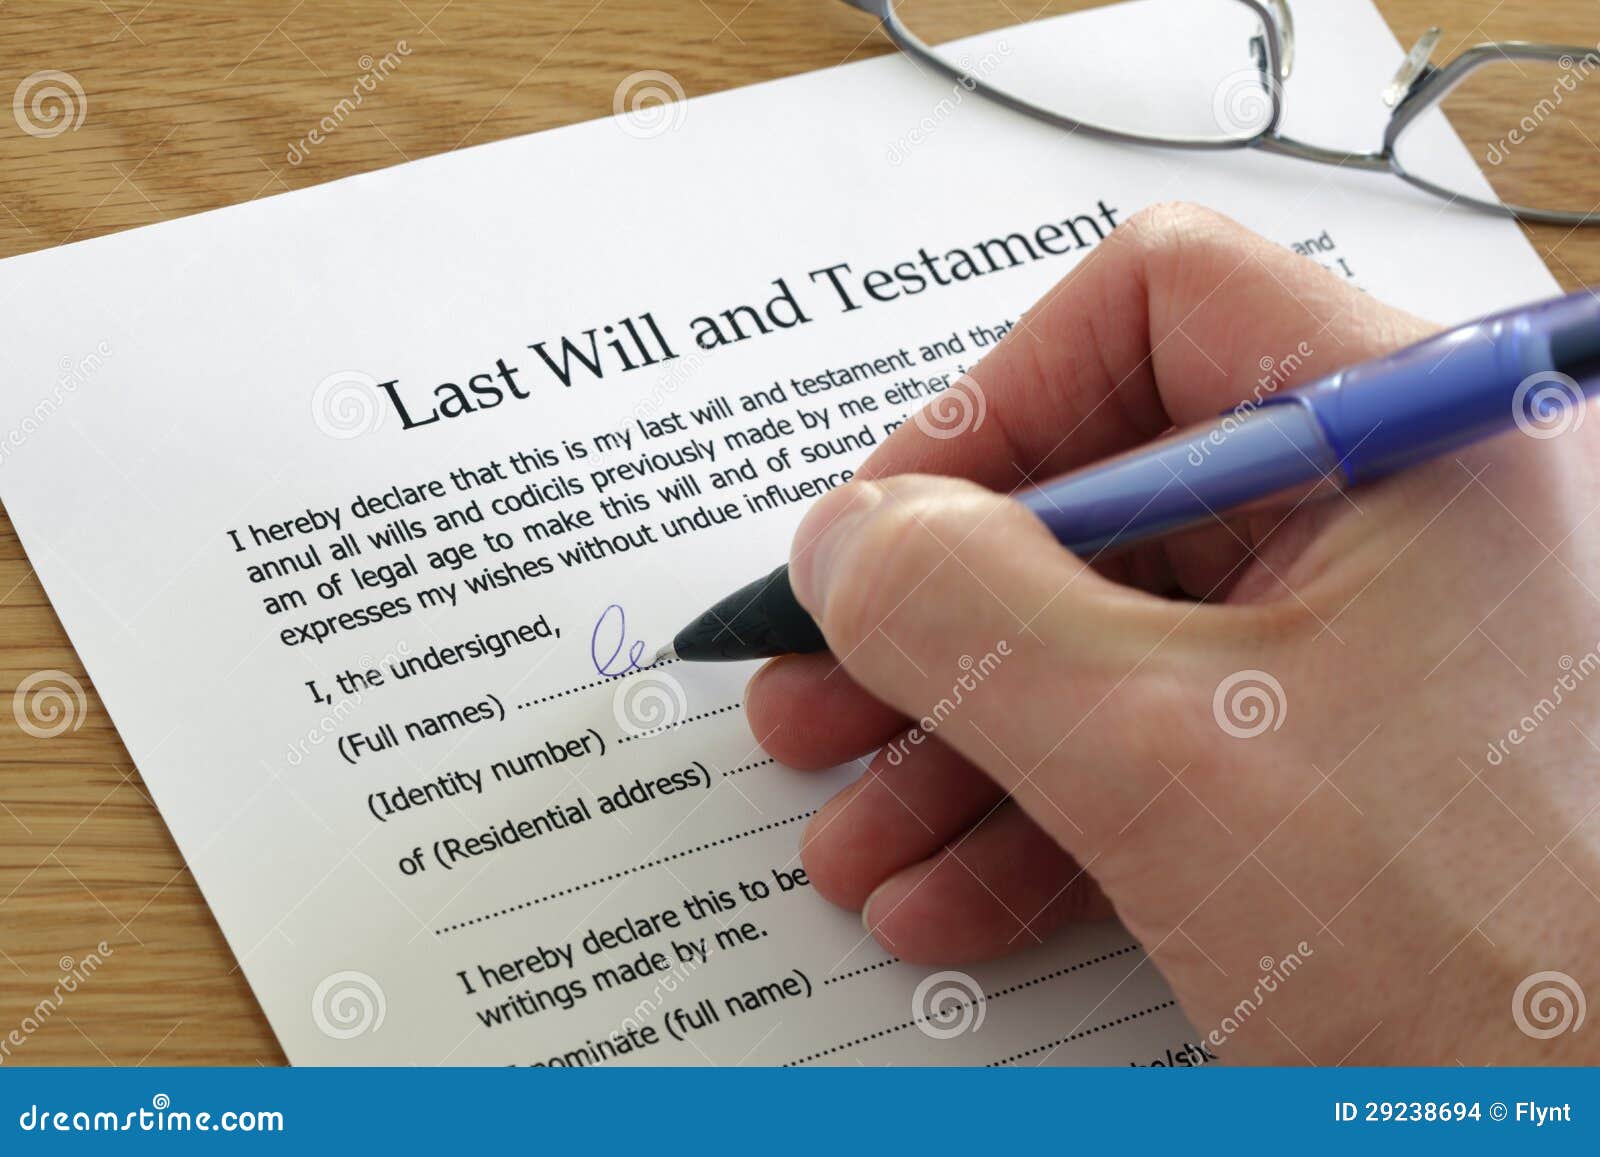 signing last will and testament